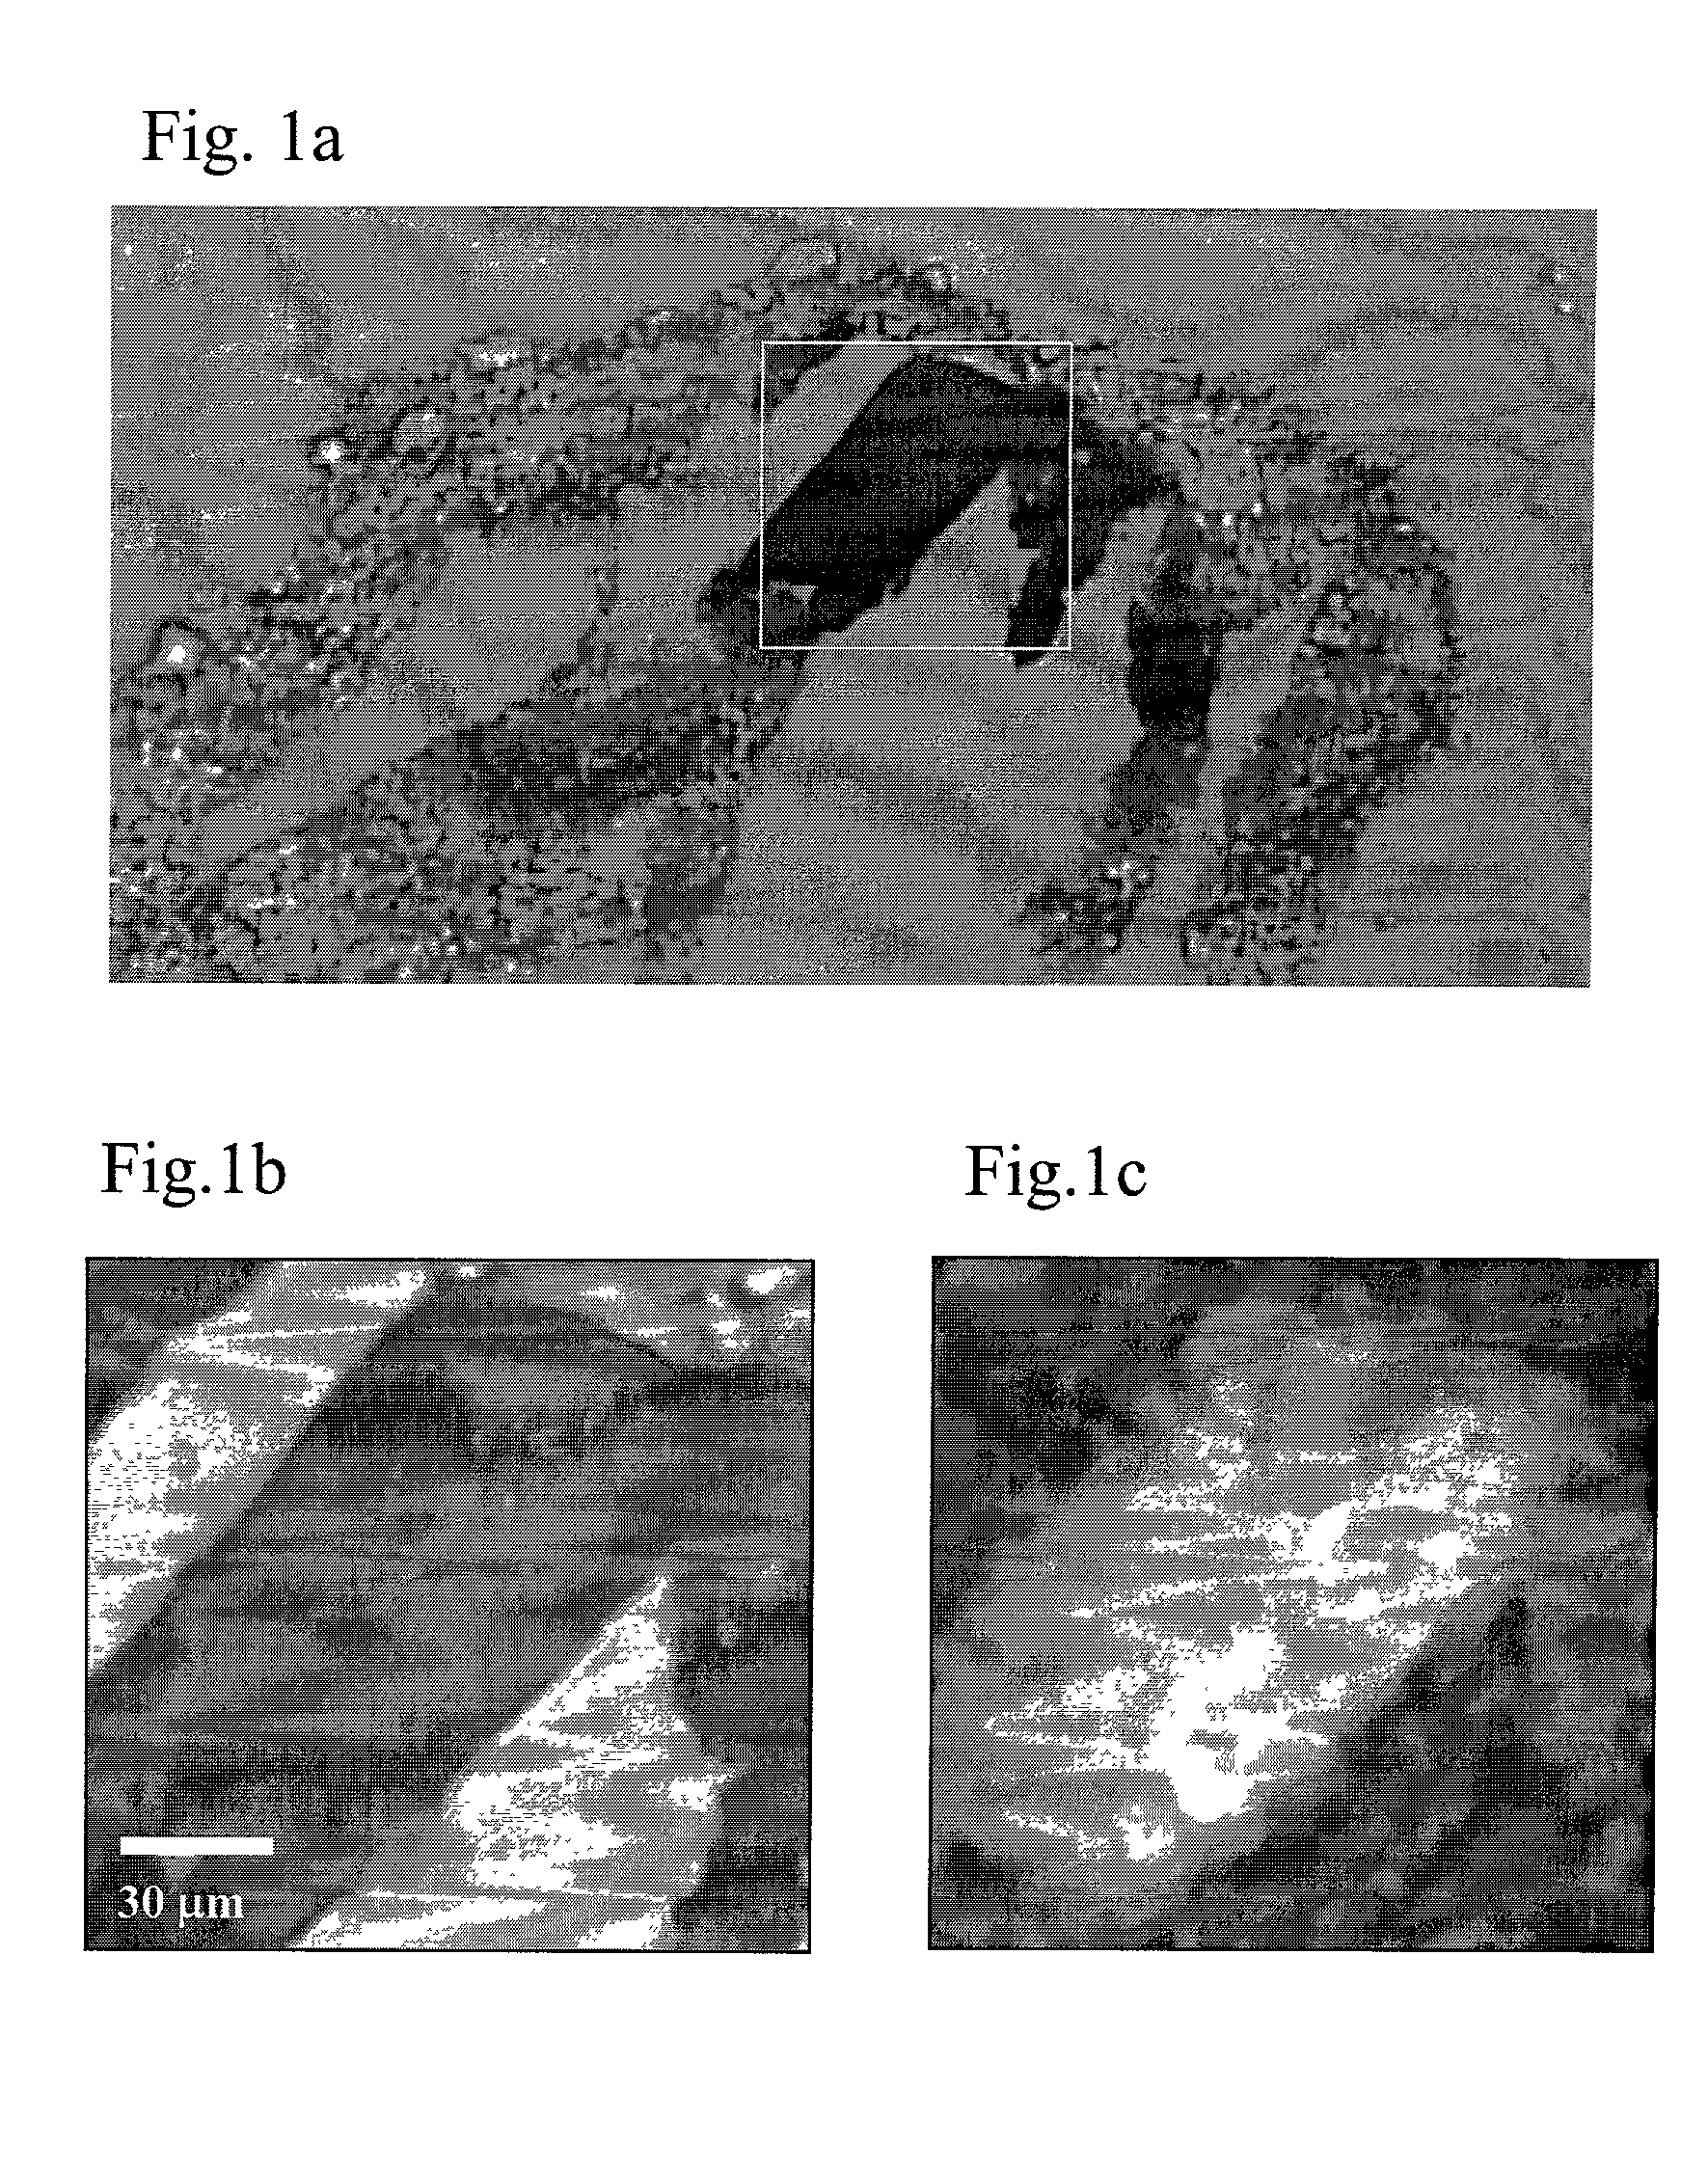 Method for Raman chemical imaging of endogenous chemicals to reveal tissue lesion boundaries in tissue